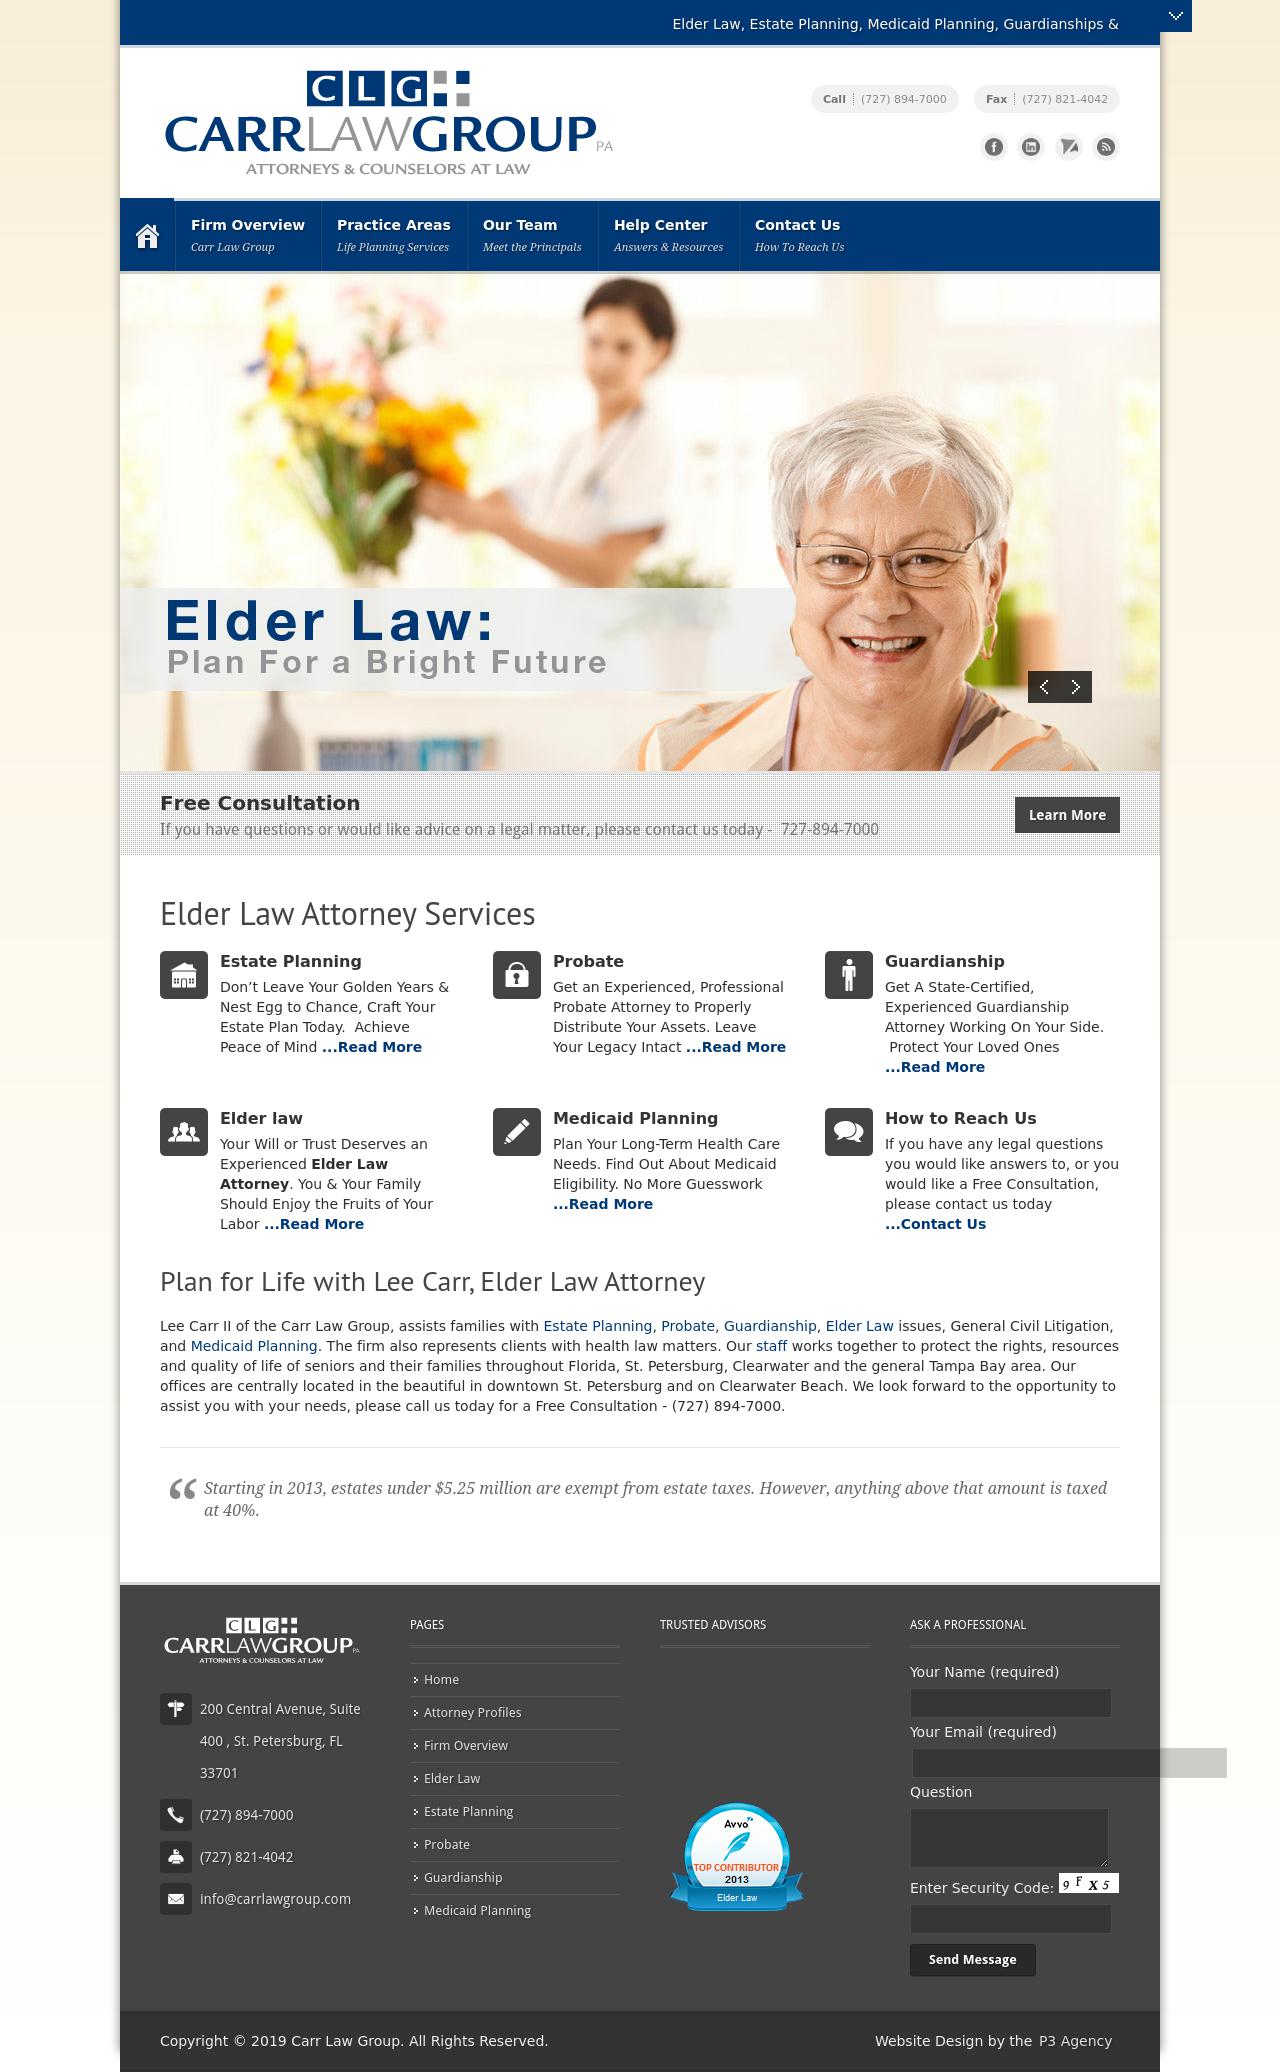 Carr Law Group, PA - St. Petersburg FL Lawyers